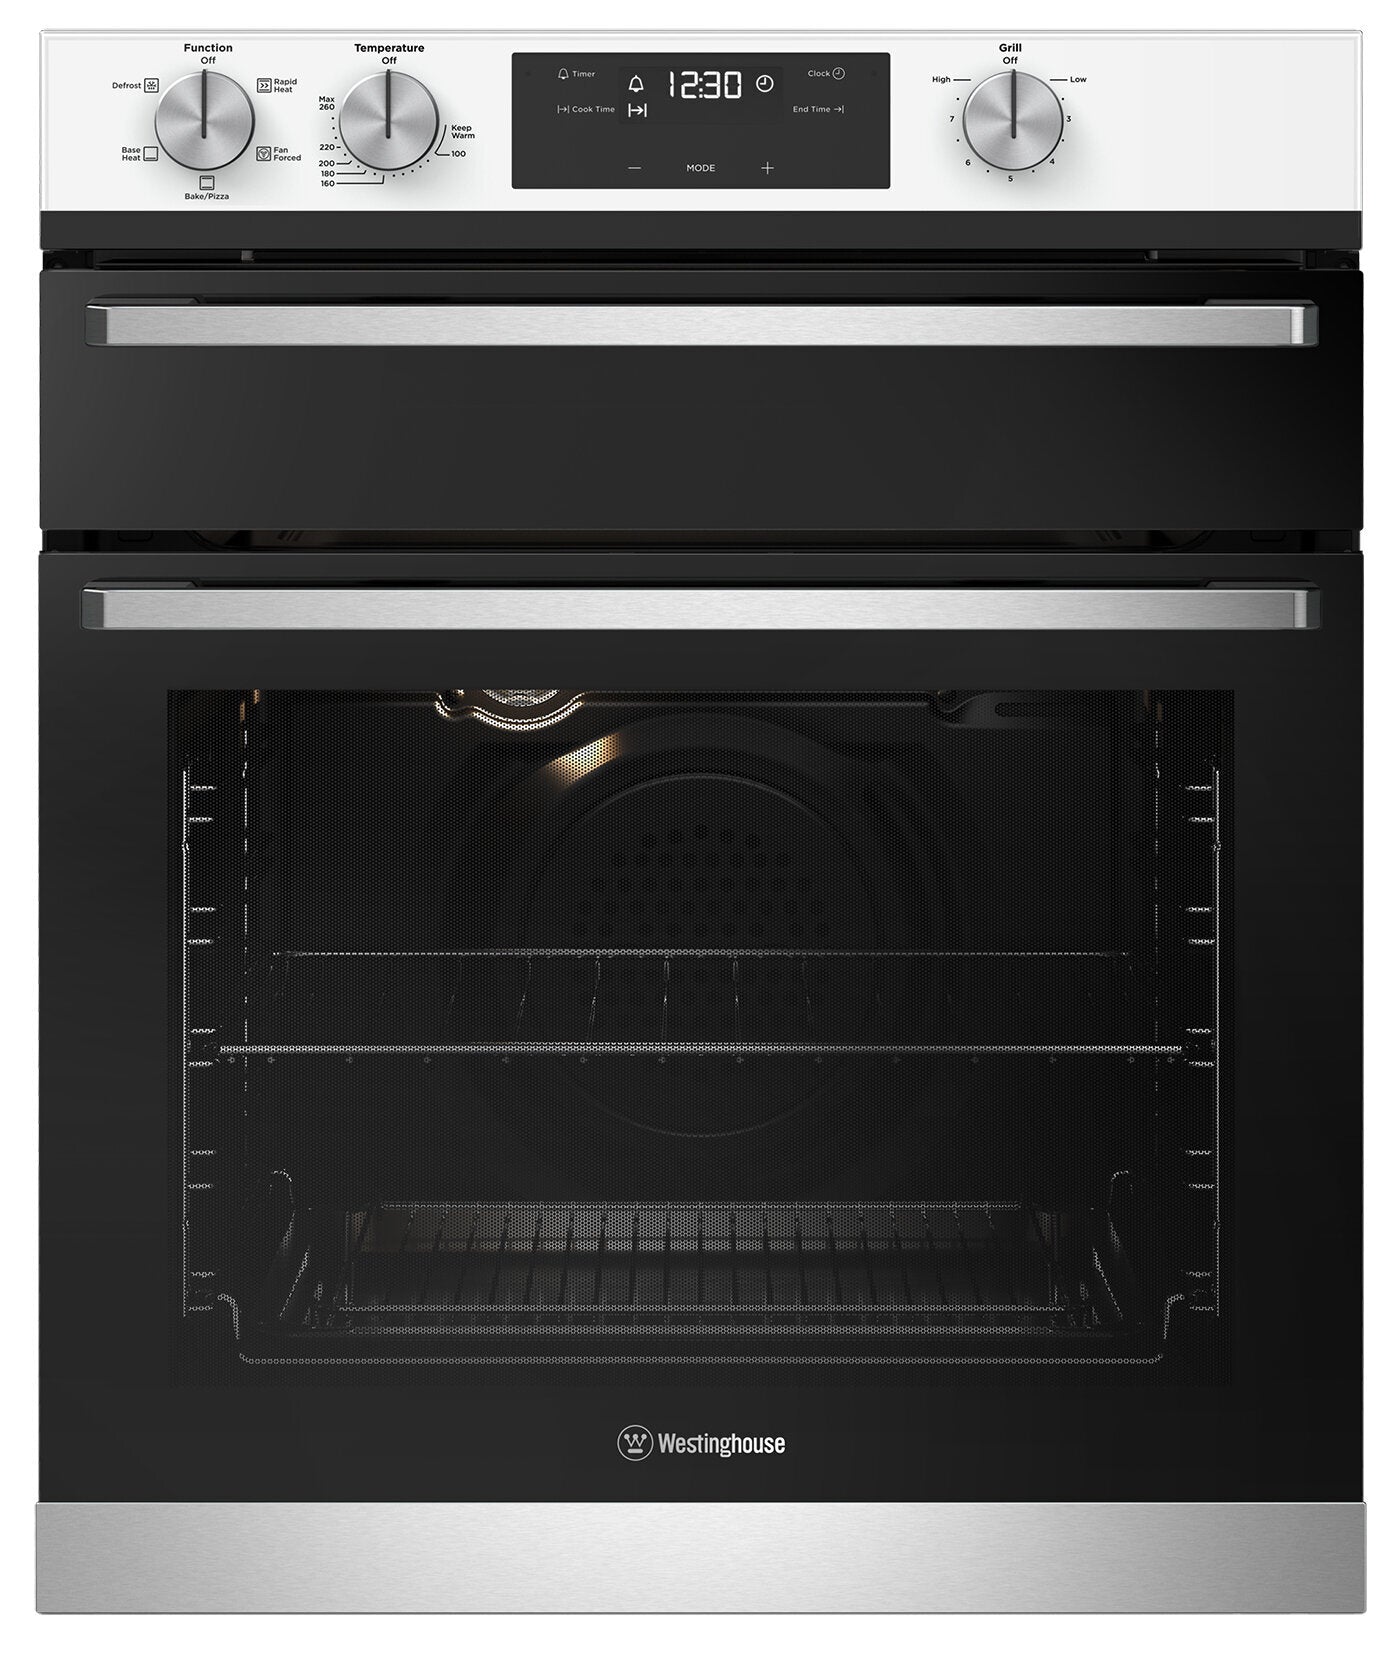 Westinghouse 60cm Electric Built-In Oven Model WVE655WC